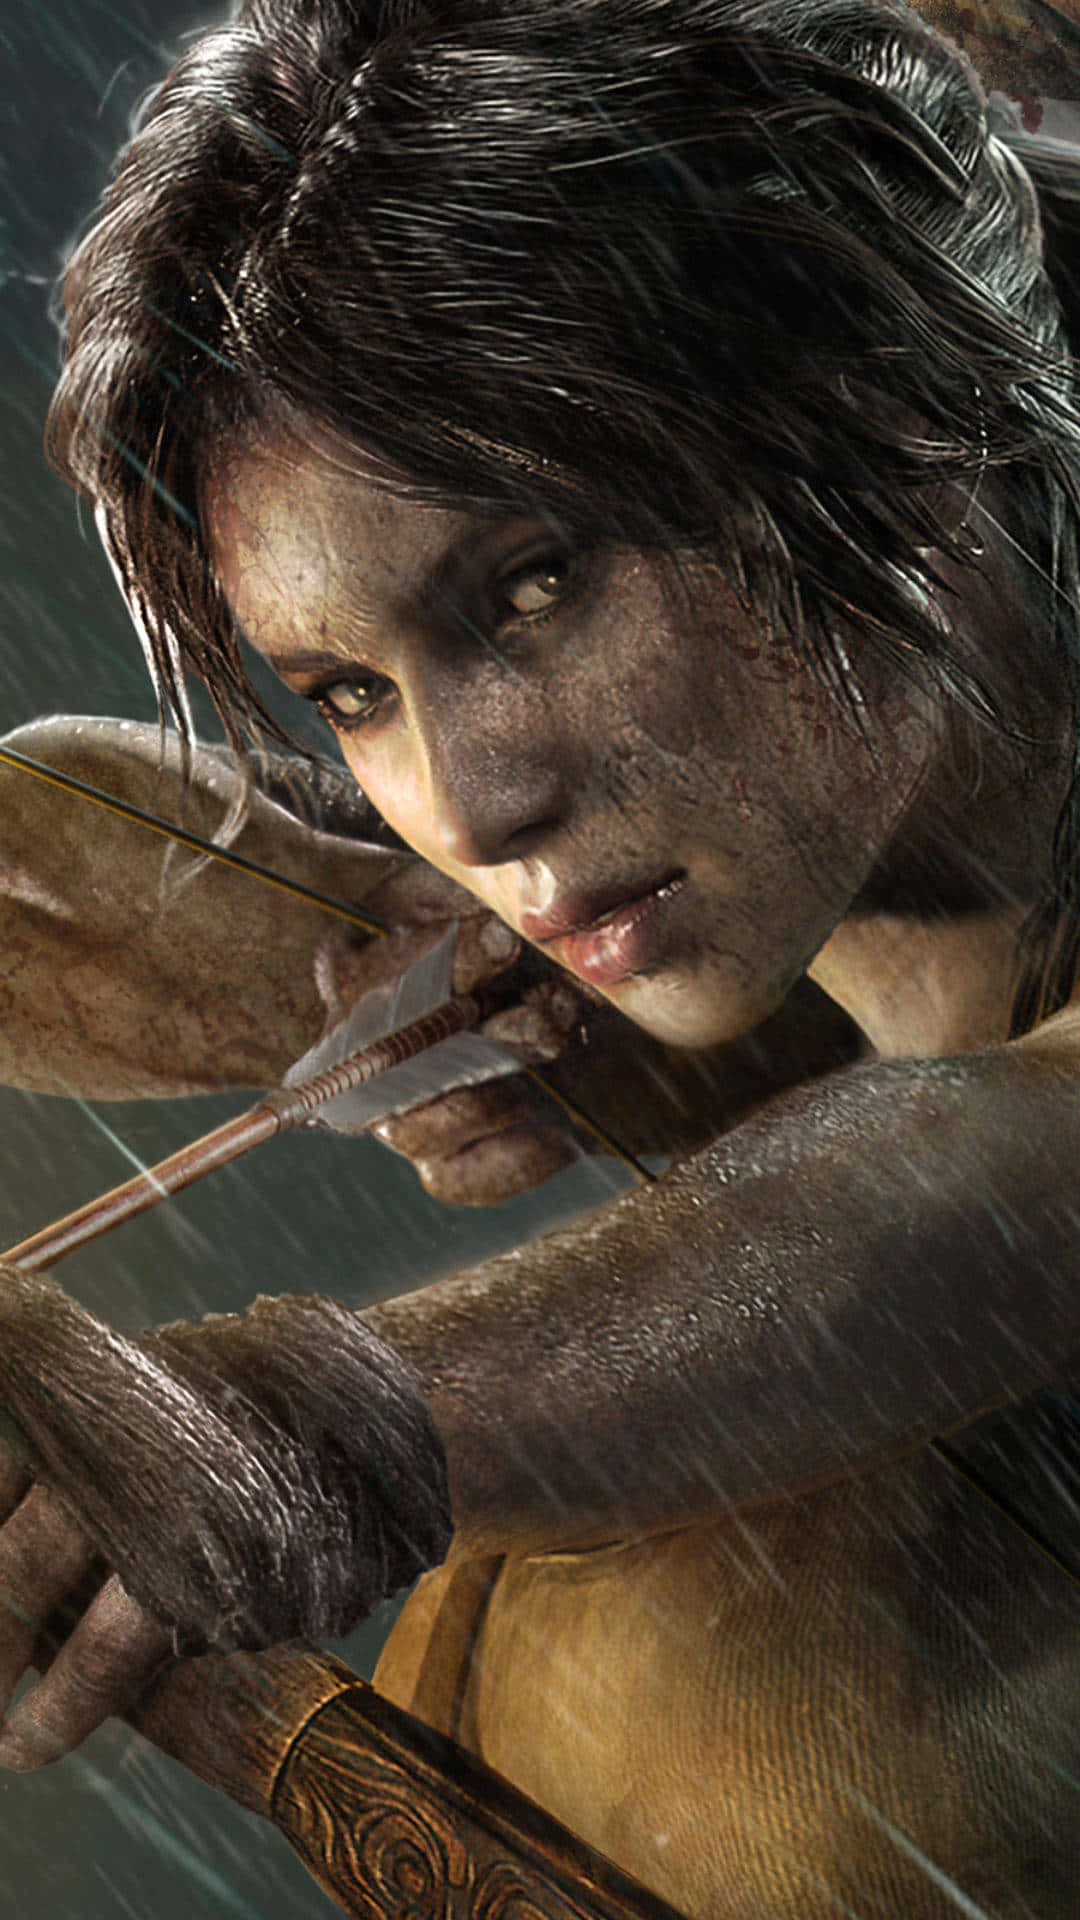 A Woman With A Bow And Arrow In The Rain